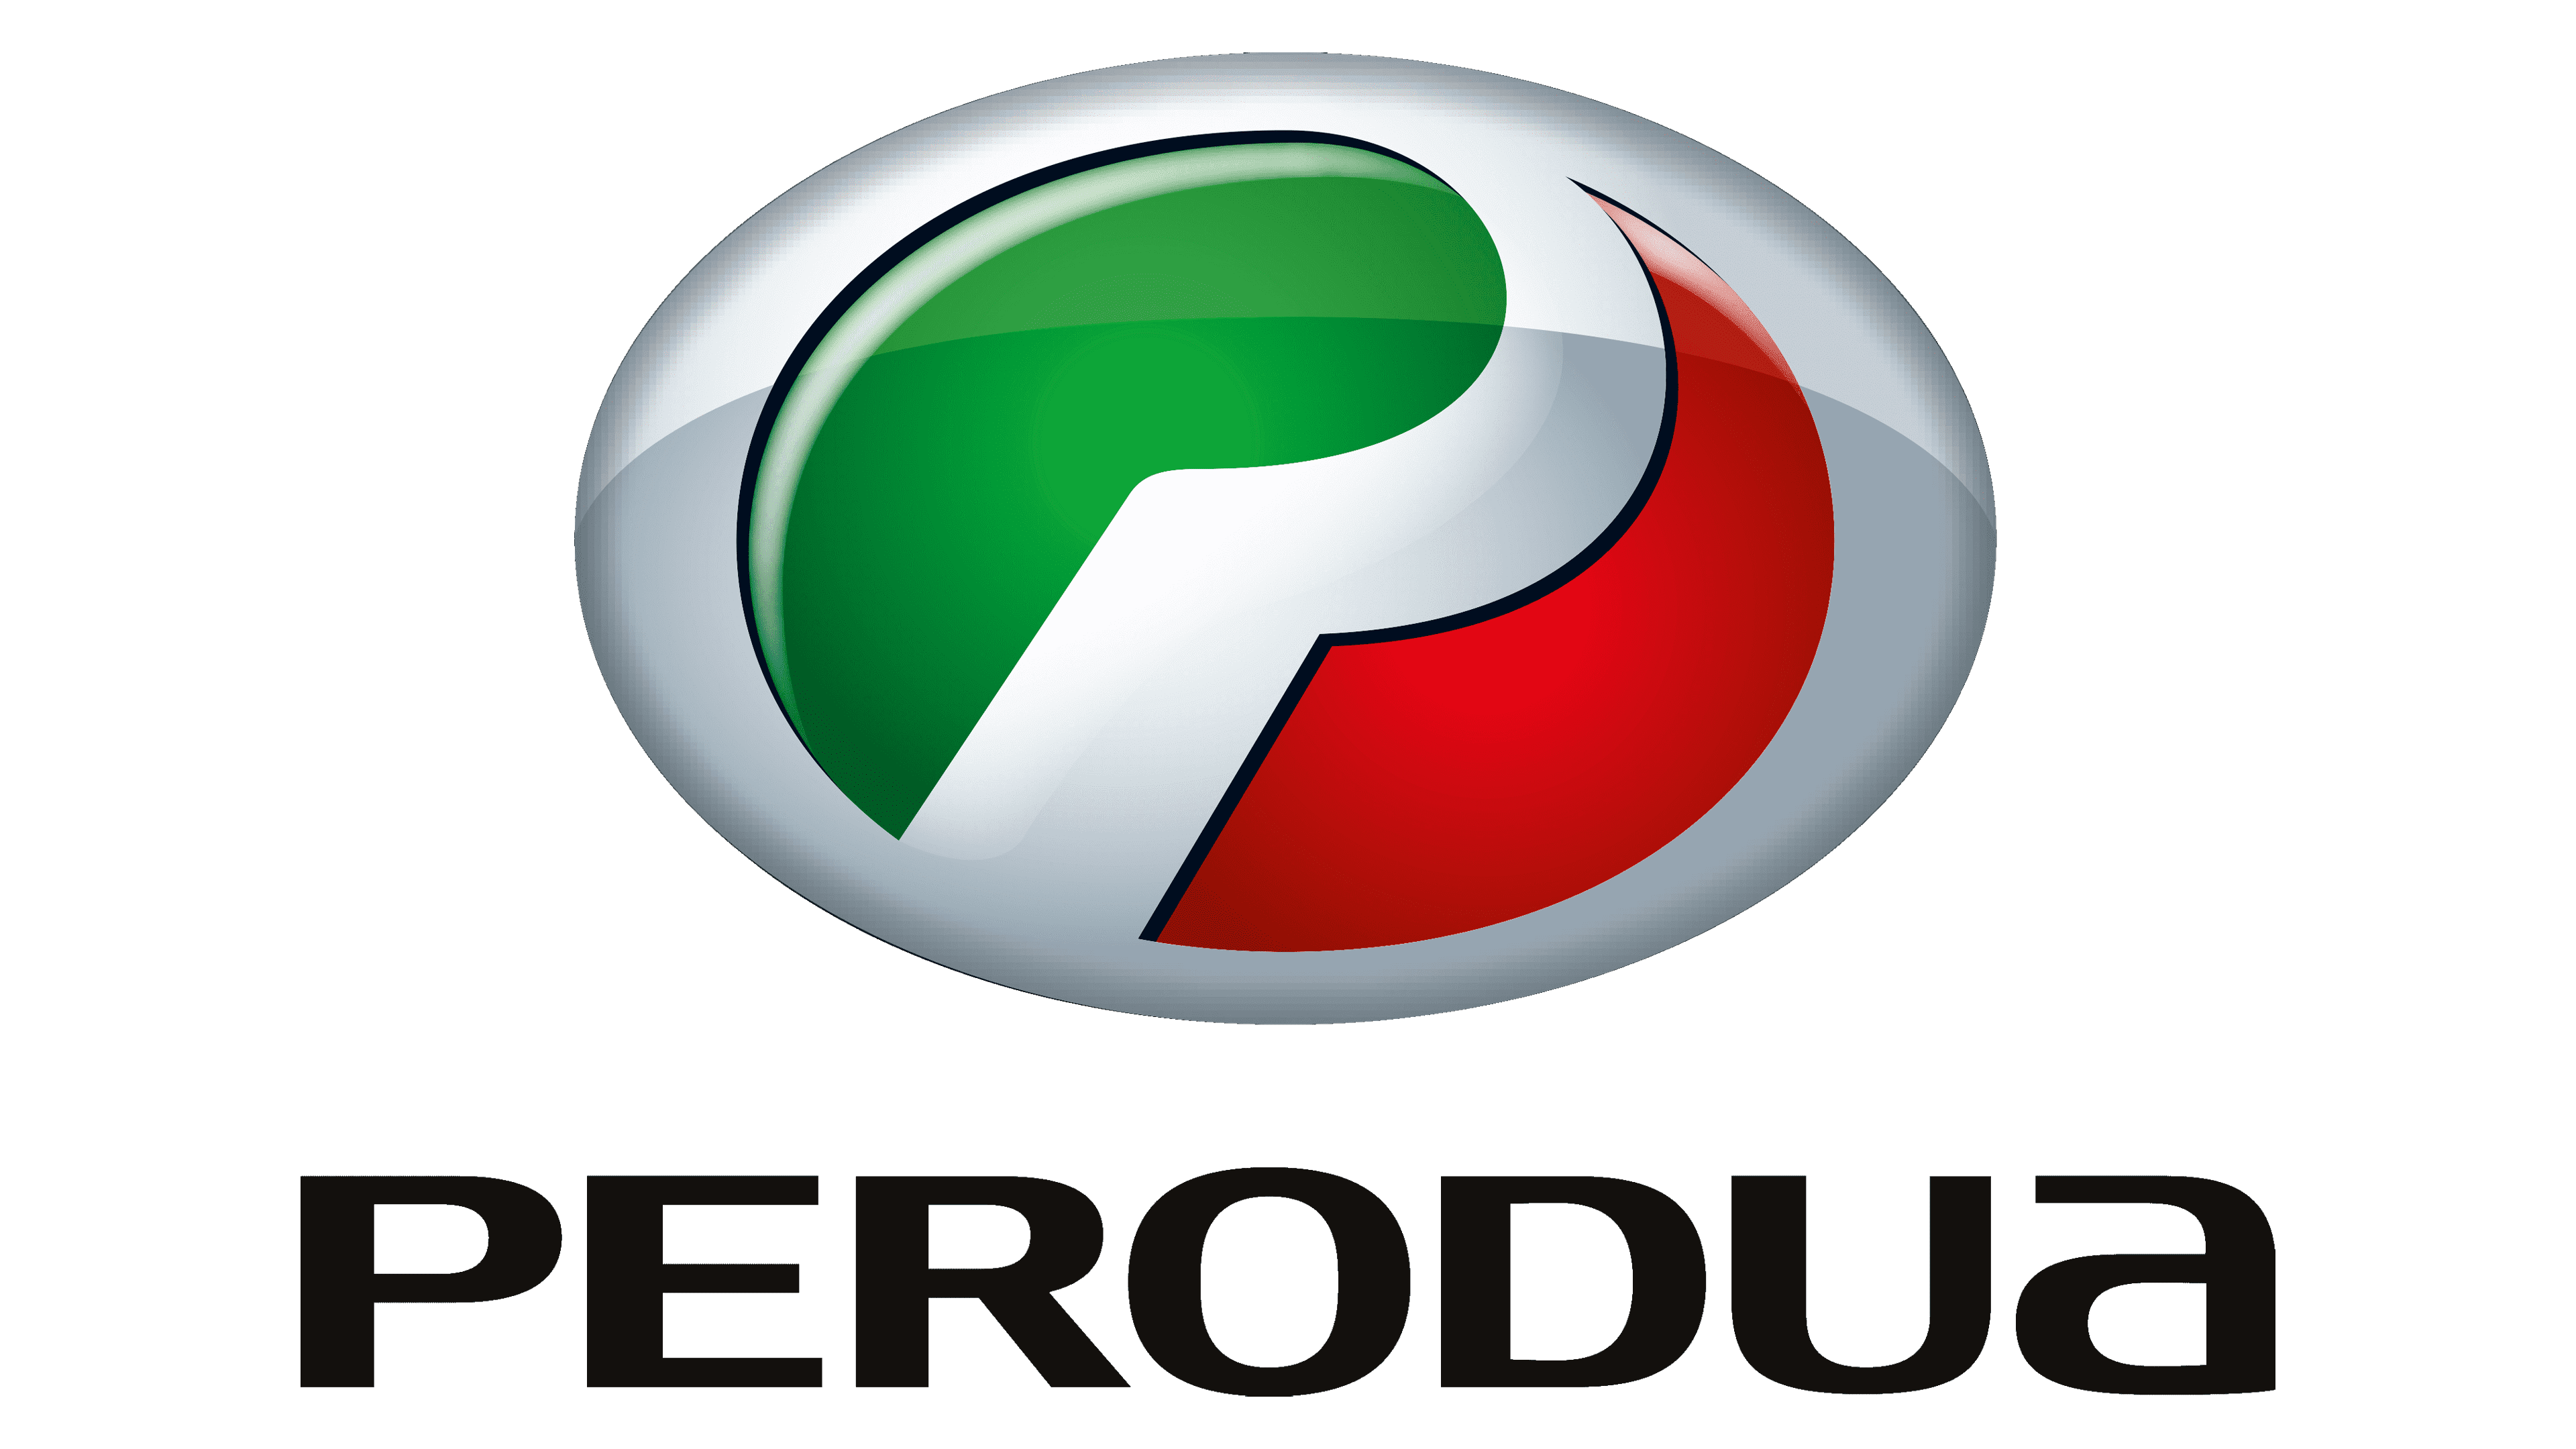 Perodua Logo And Sign New Logo Meaning And History Png Svg Images And